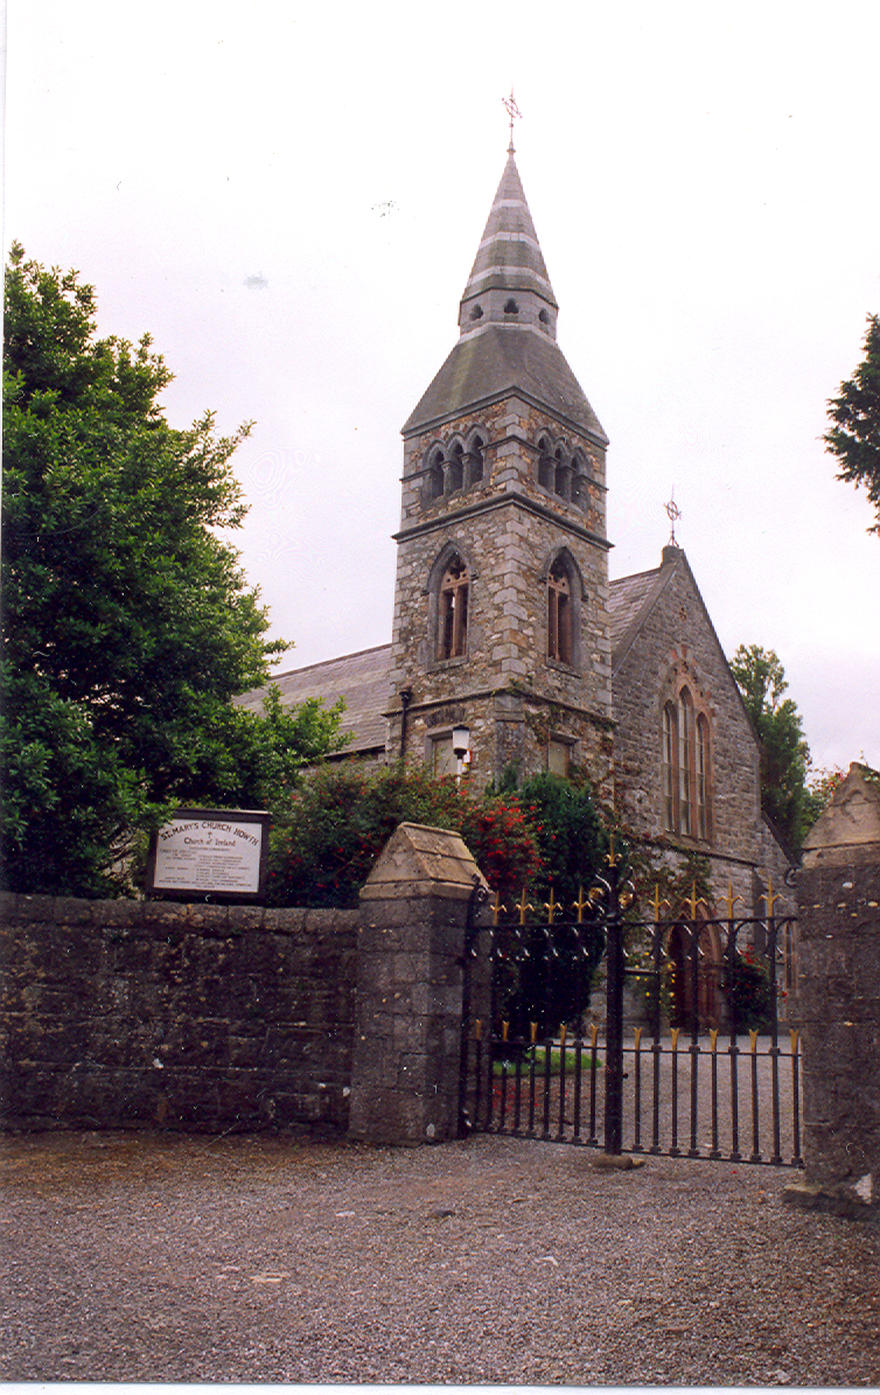 St Mary’s Church in the parish of Howth